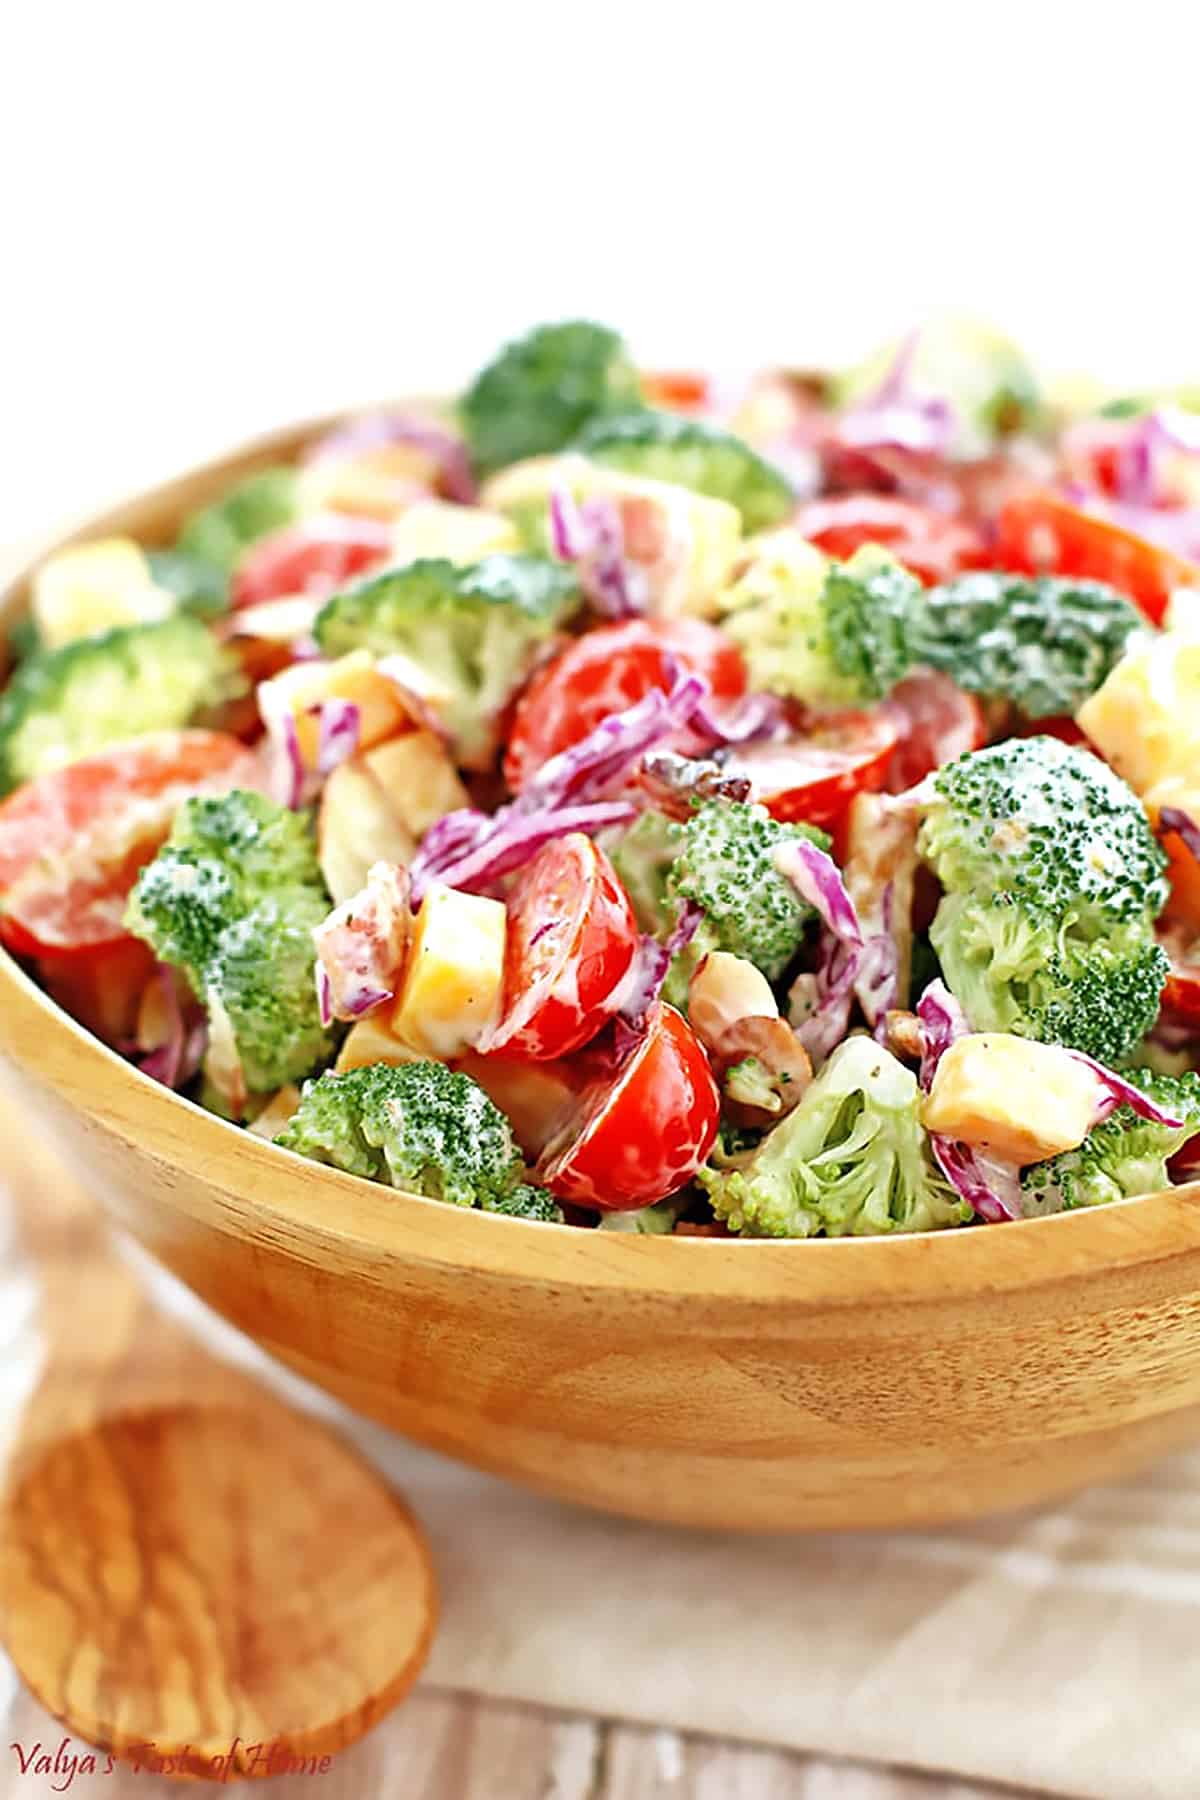 This Creamy Cheddar Broccoli and Tomato Salad Recipe is a great addition to your holiday feast or any occasion at any time of the year.